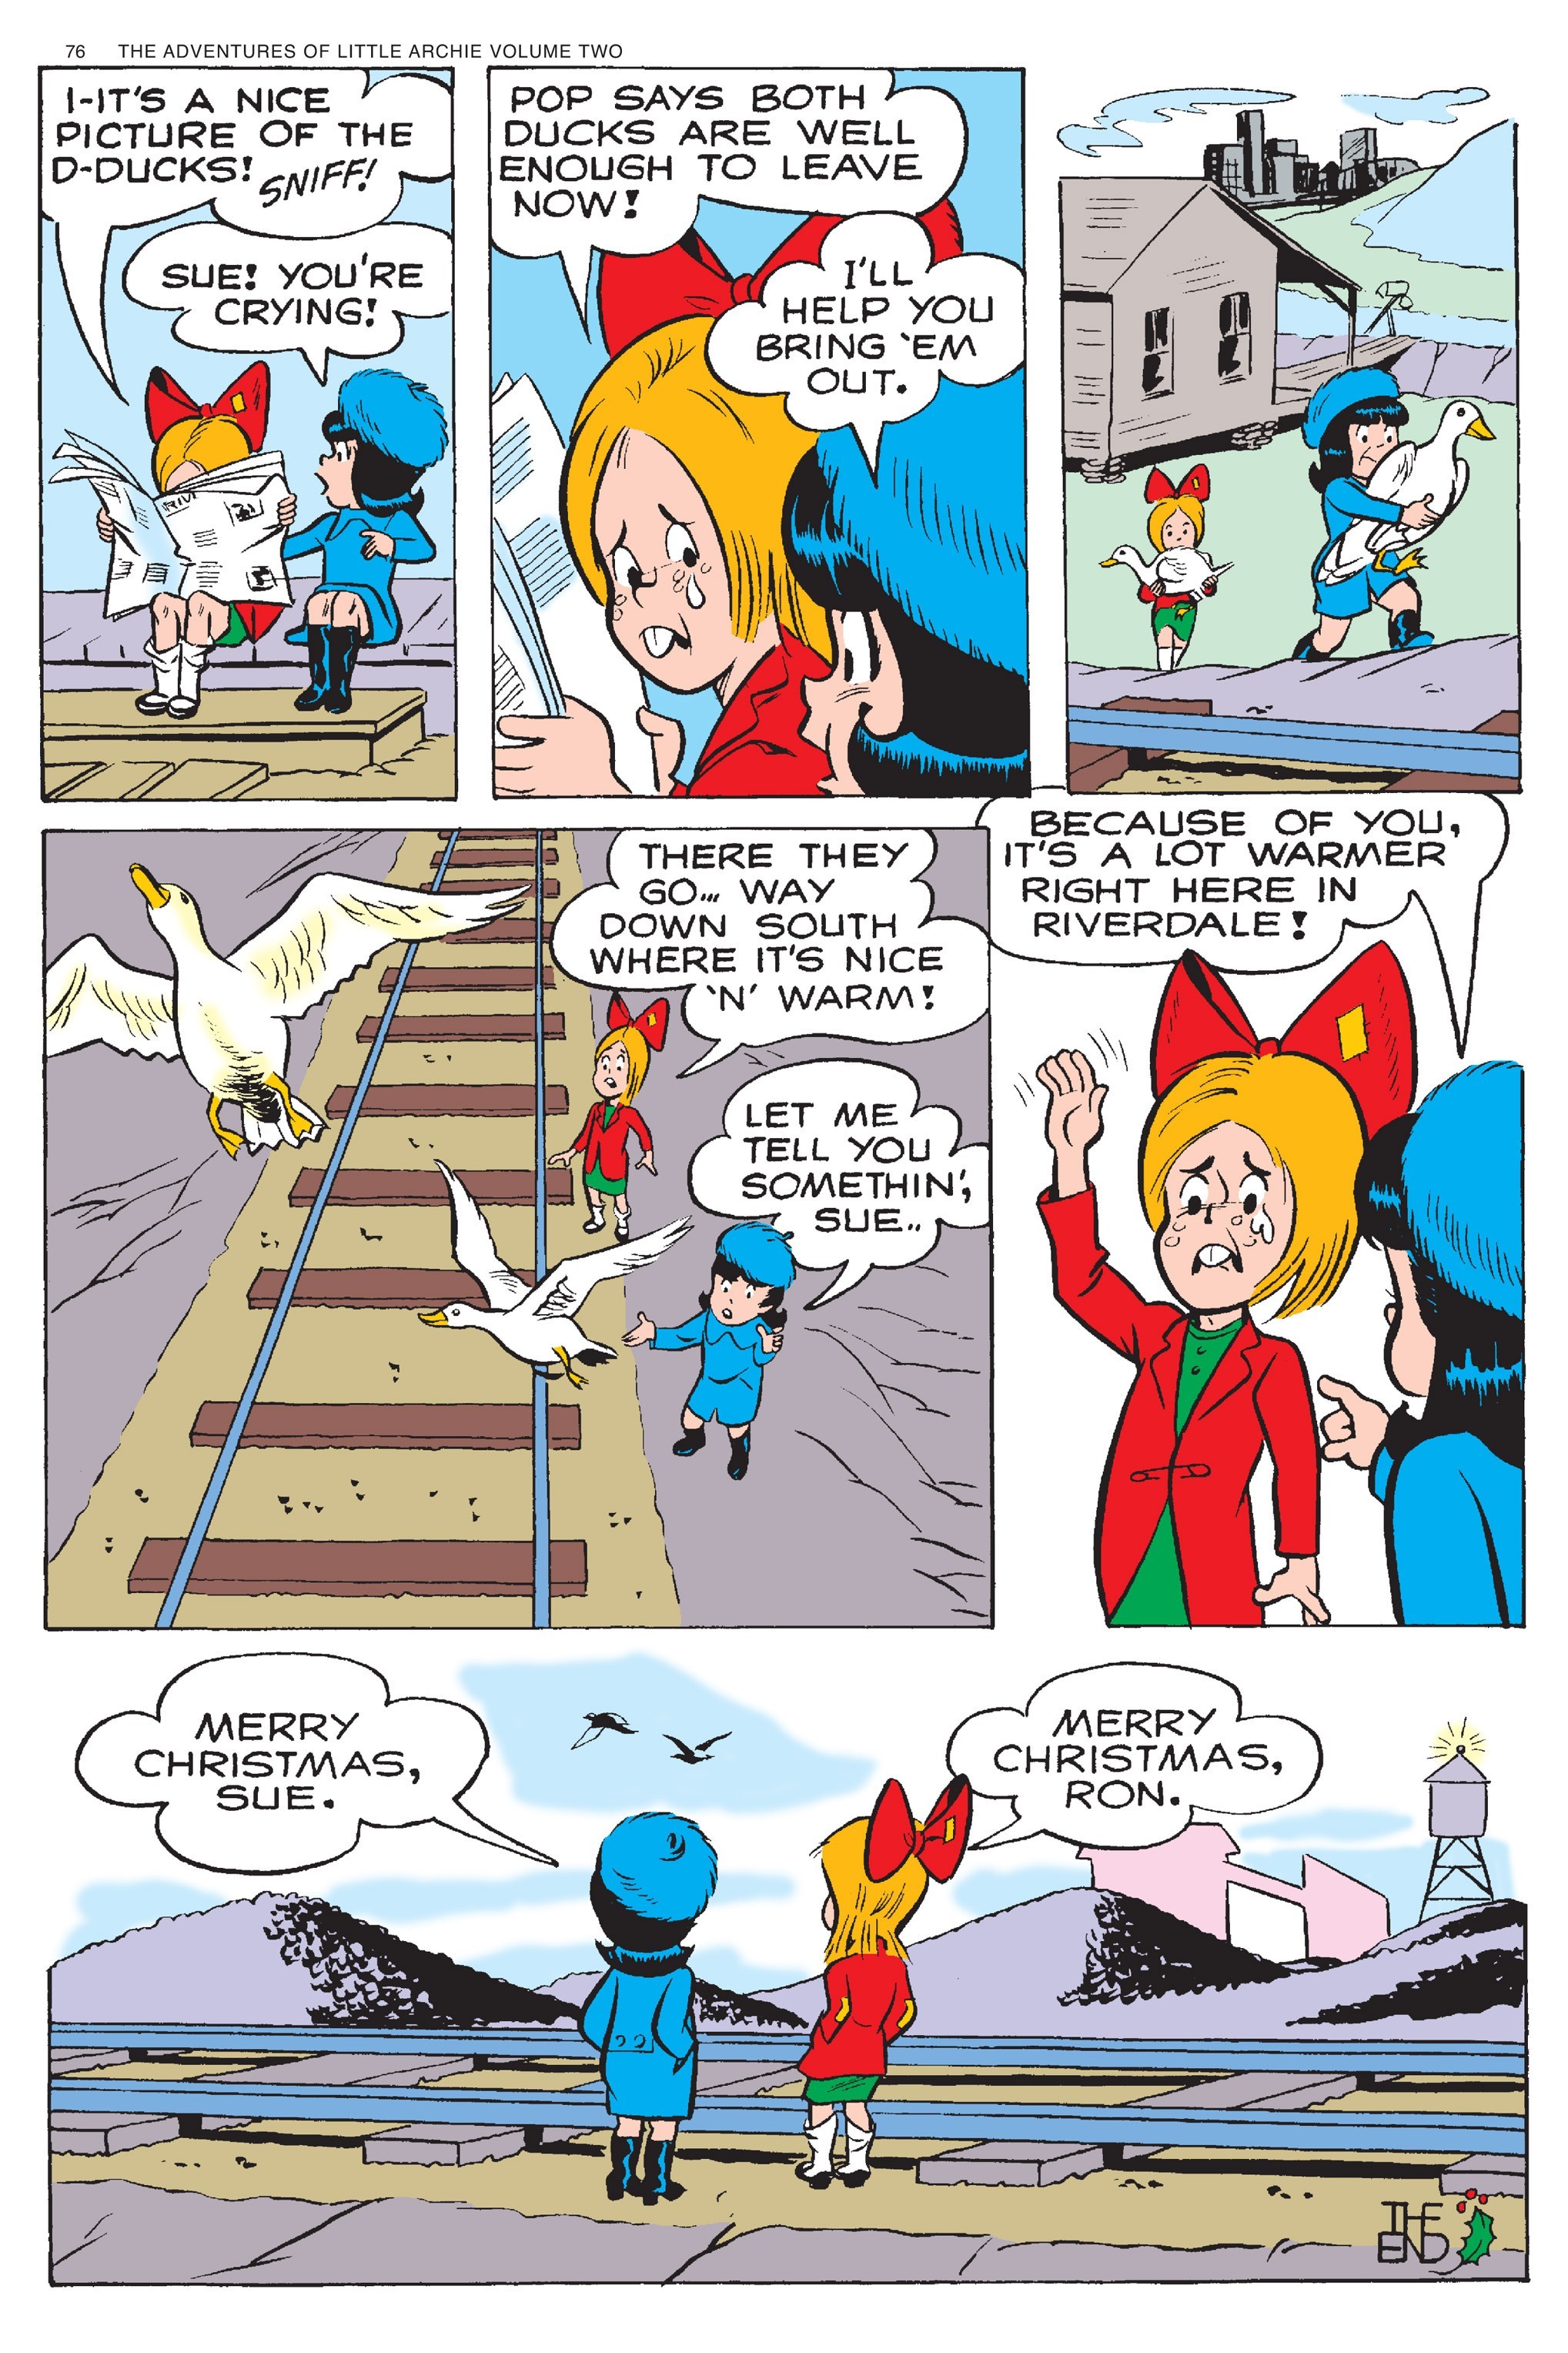 Read online Adventures of Little Archie comic -  Issue # TPB 2 - 77